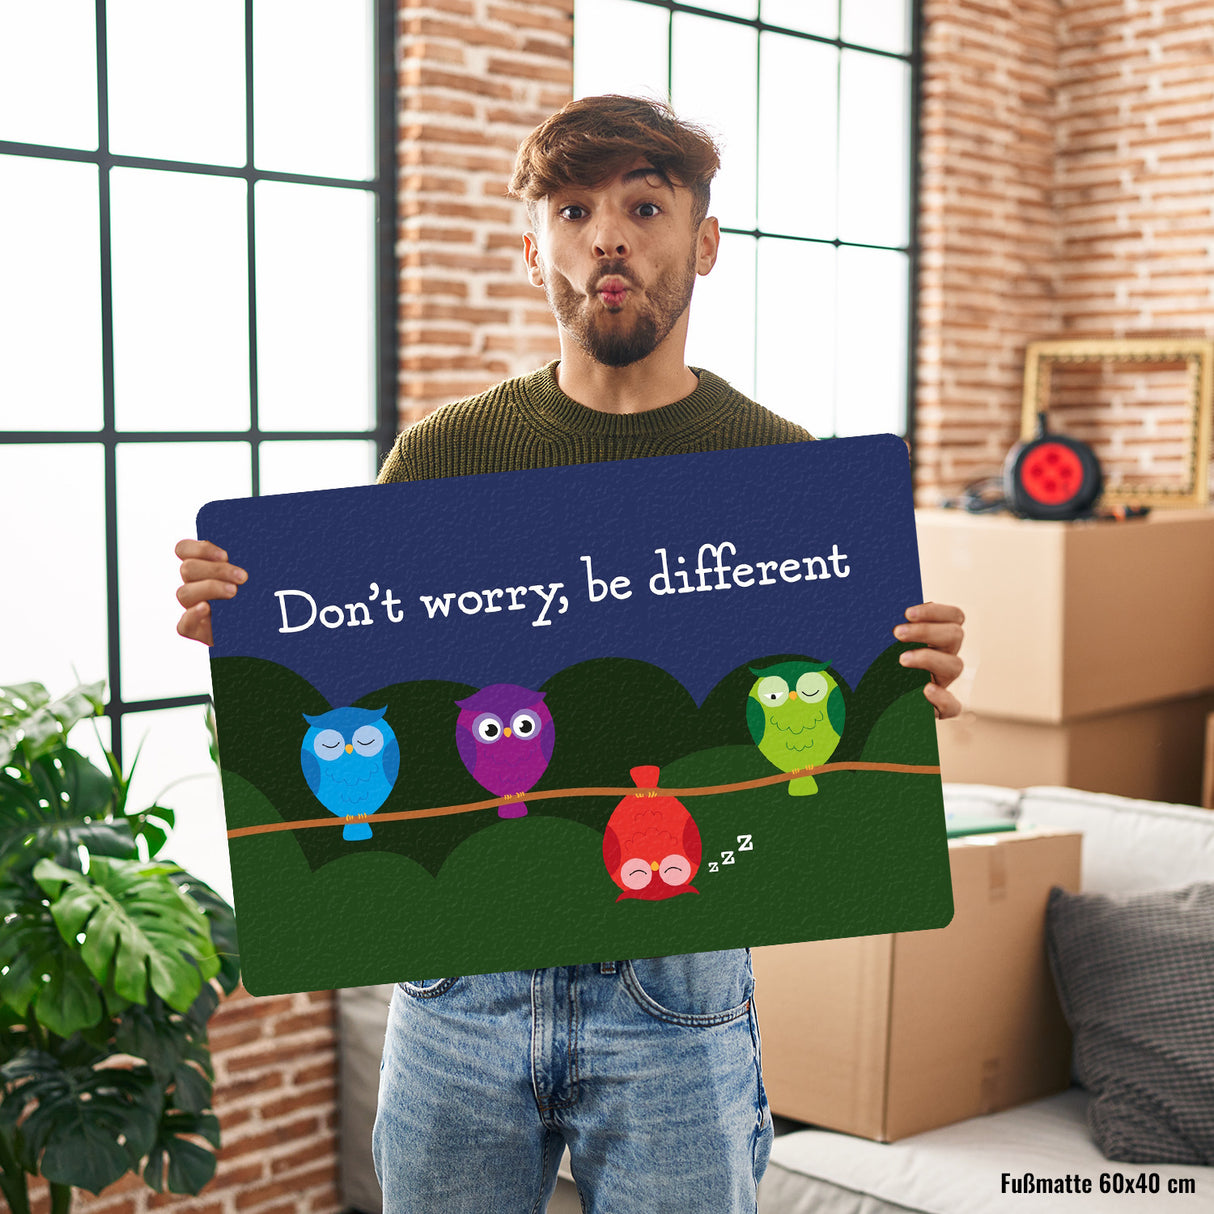 Eule Fußmatte in 35x50 cm ohne Rand mit Spruch Dont worry be different